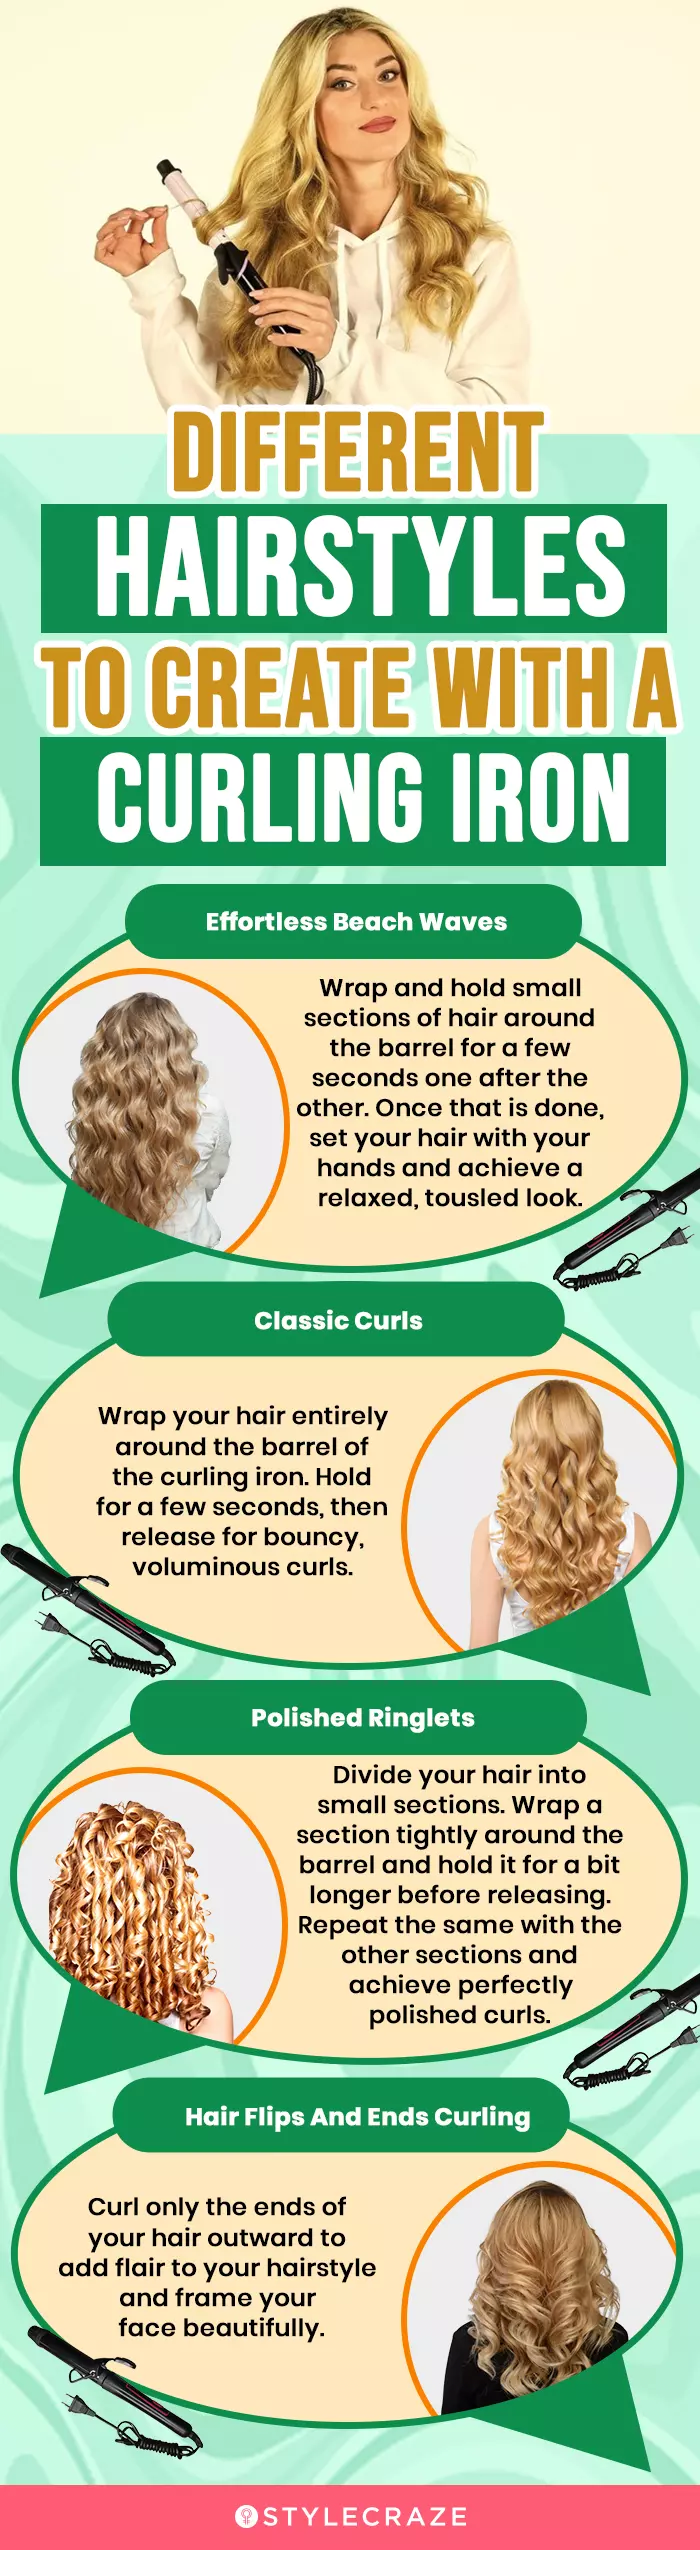 Different Hairstyles To Create With A Curling Iron (infographic)